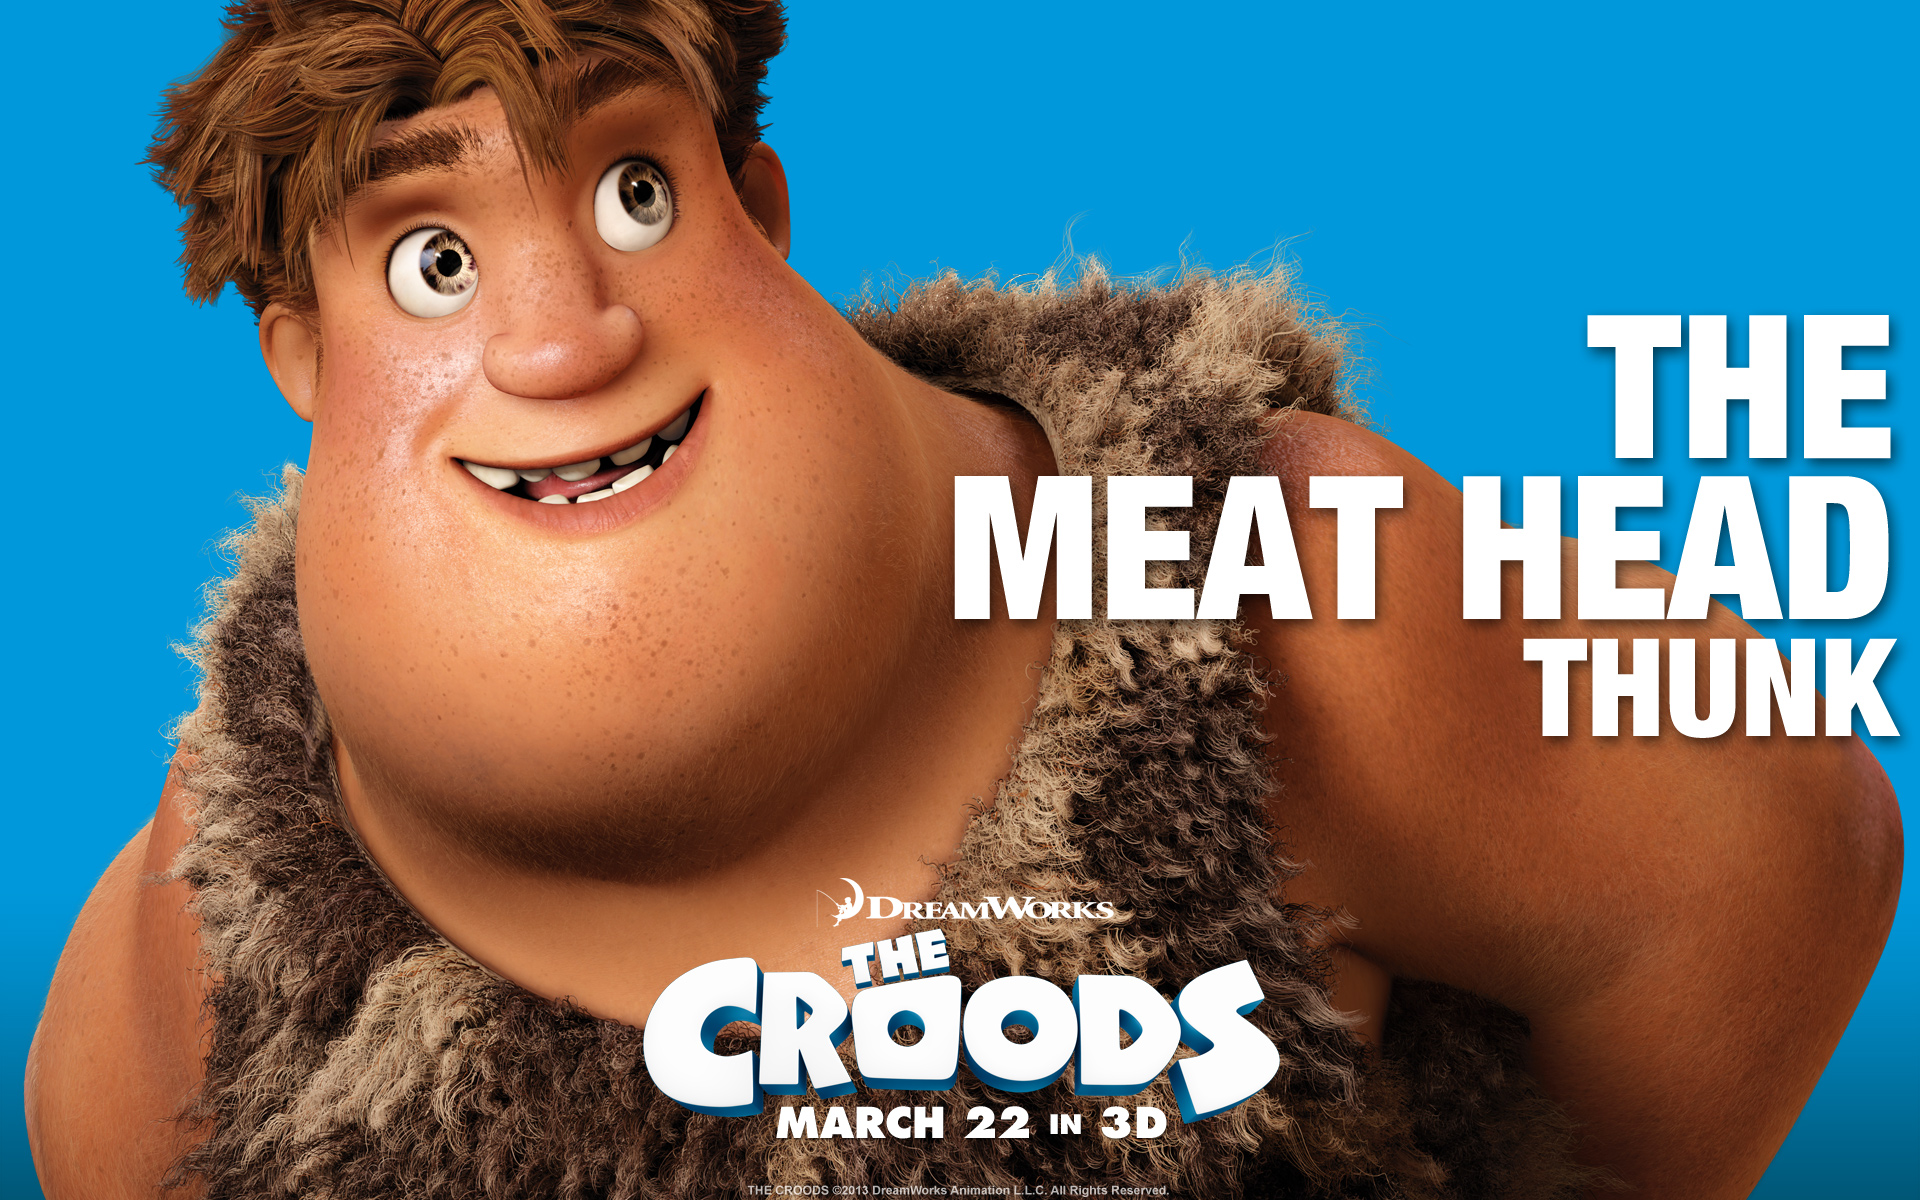 The Croods Movie Quotes.